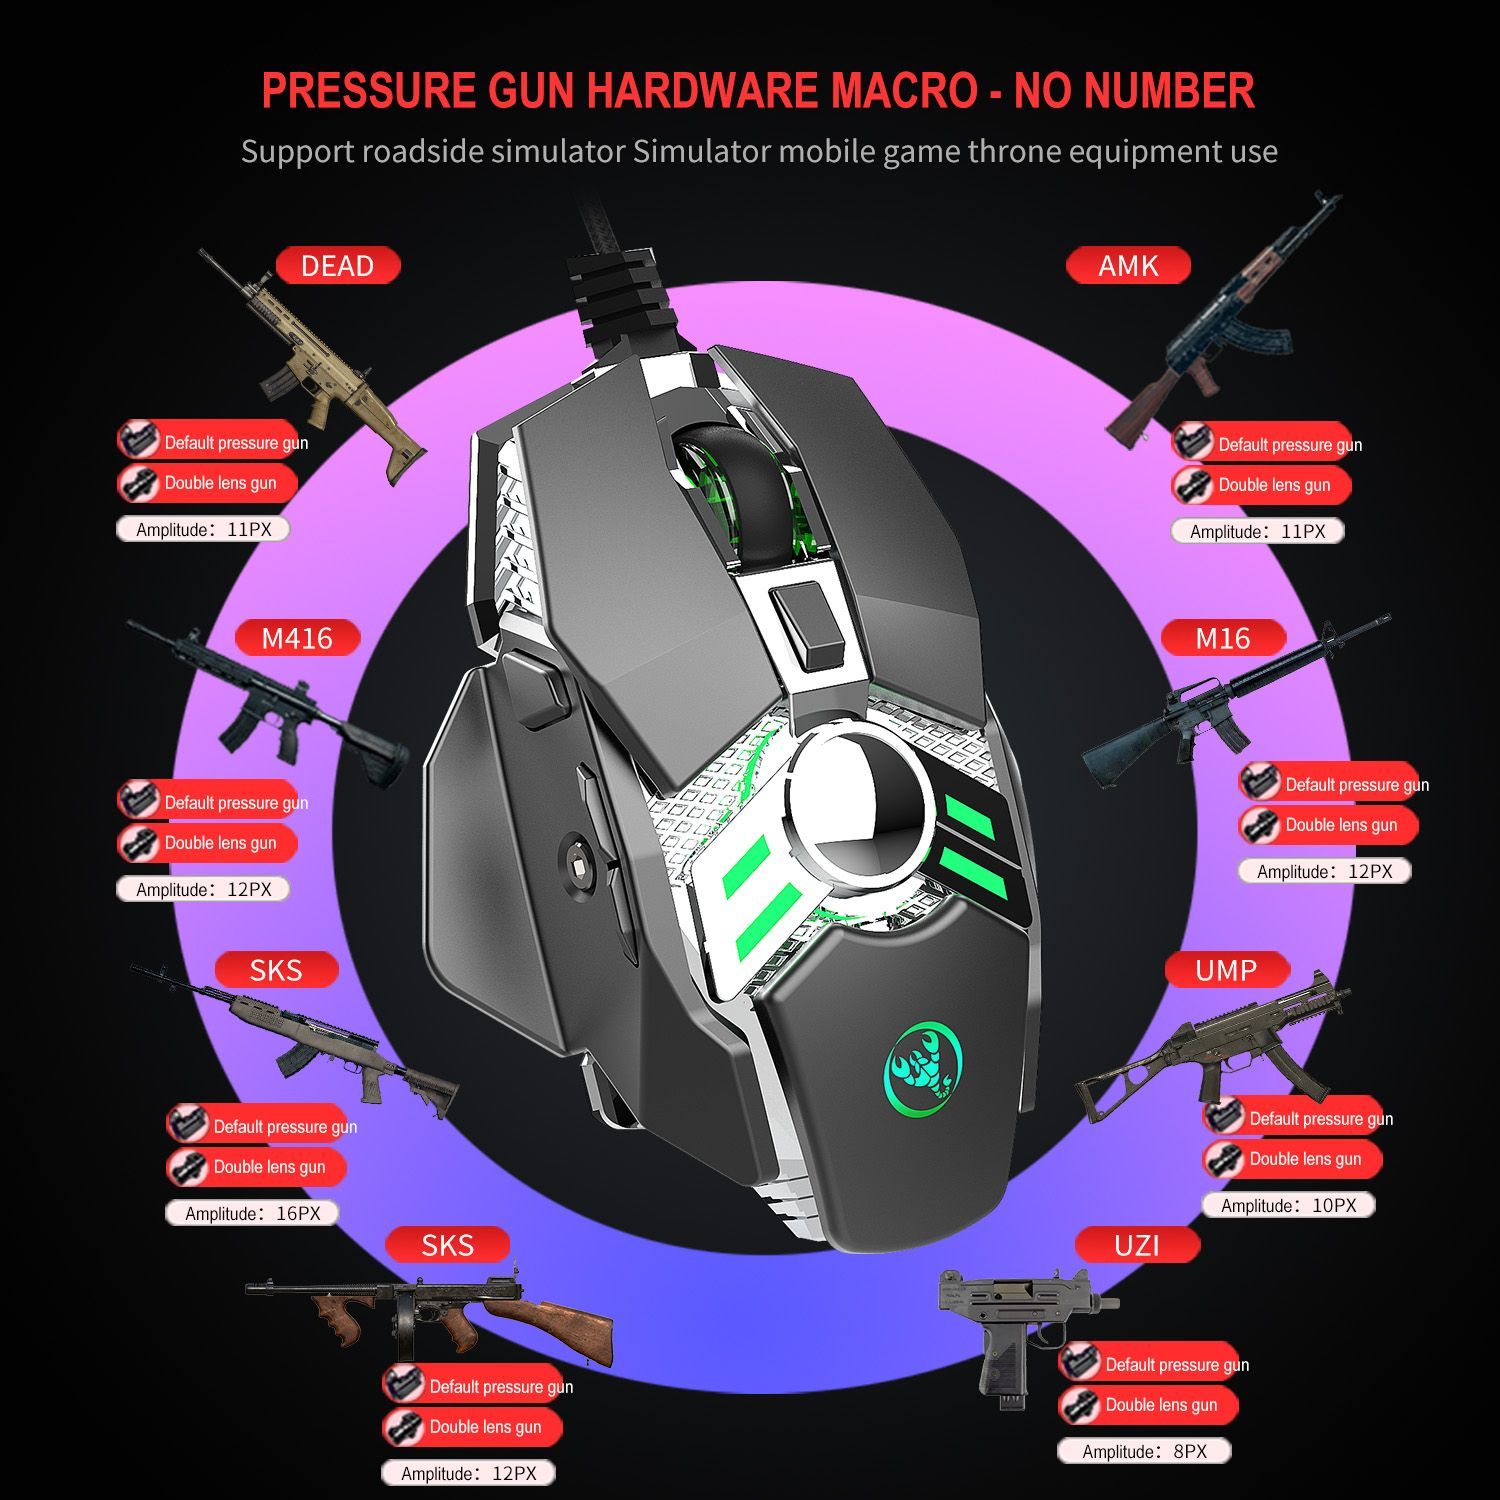 HXSJ-J200-Wired-Gaming-Mouse-6400-DPI-Seven-key-Macro-Programming-Settings-Mouse-with-Four-Adjustabl-1747597